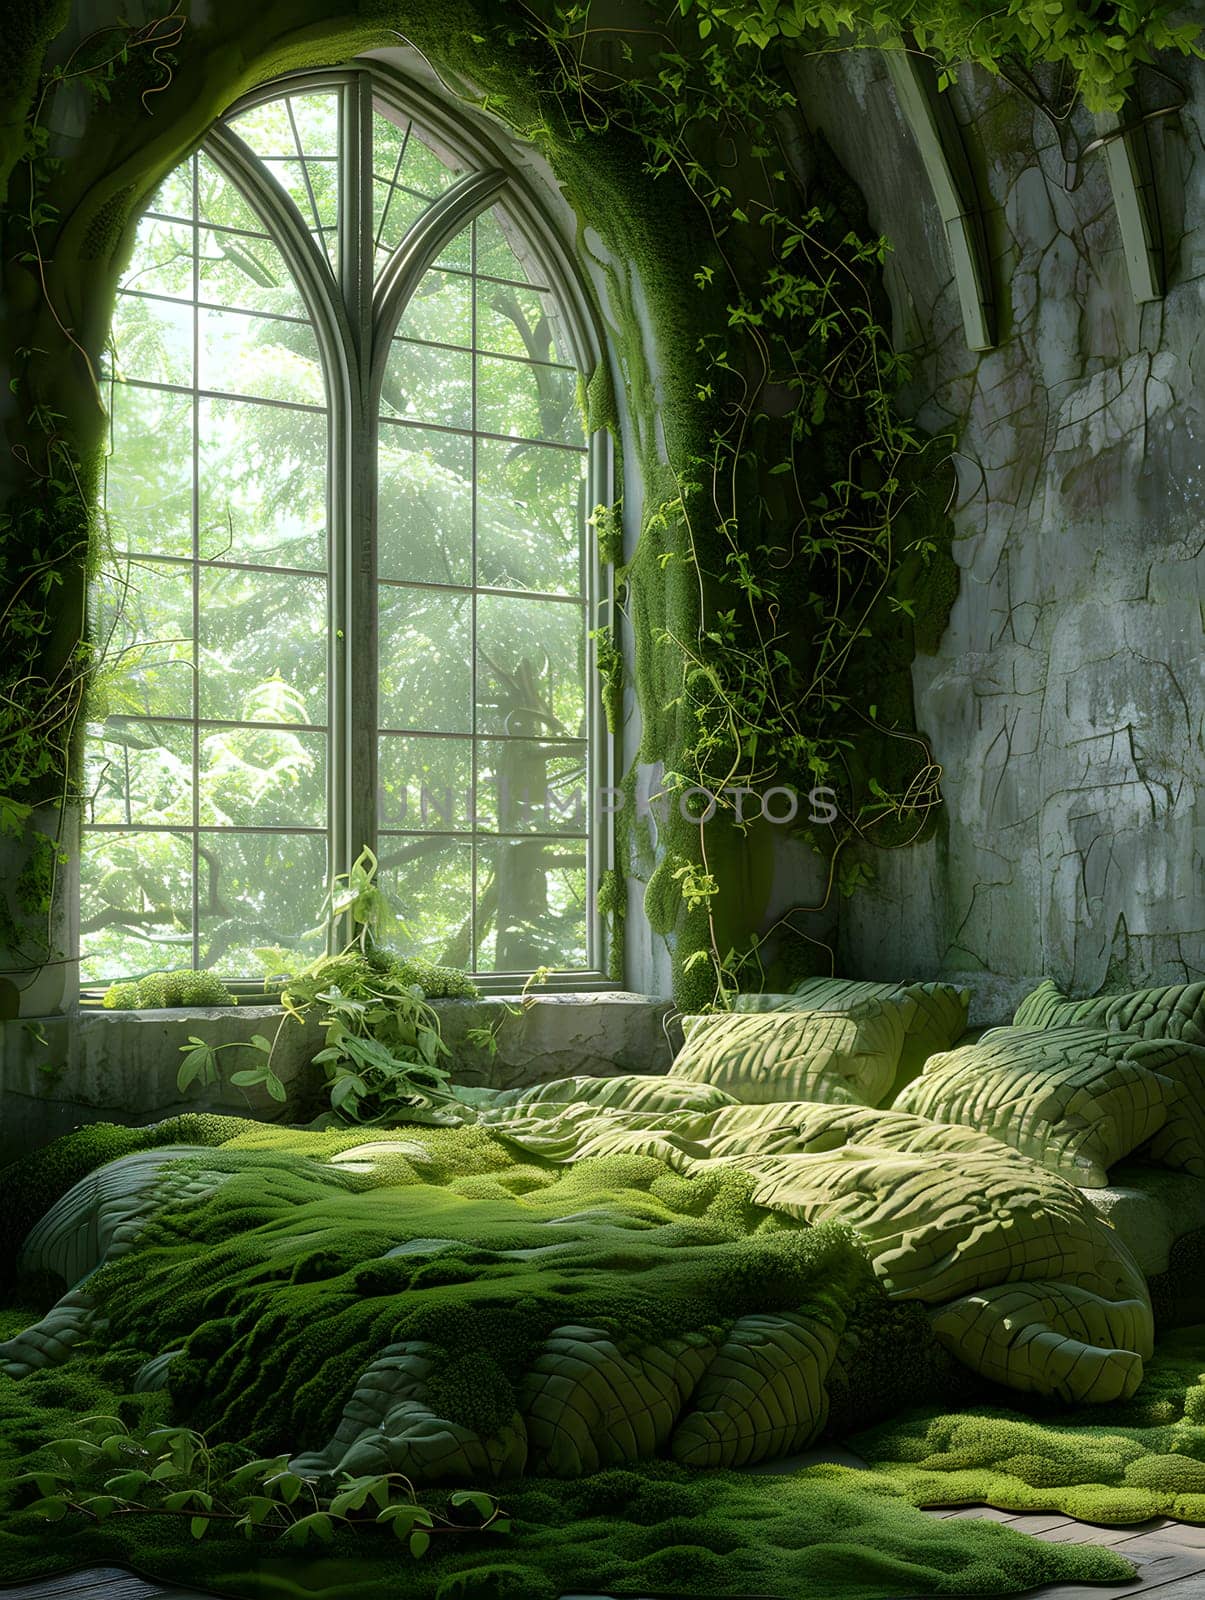 A room with a bed and a window covered in moss, bringing natural beauty indoors by Nadtochiy